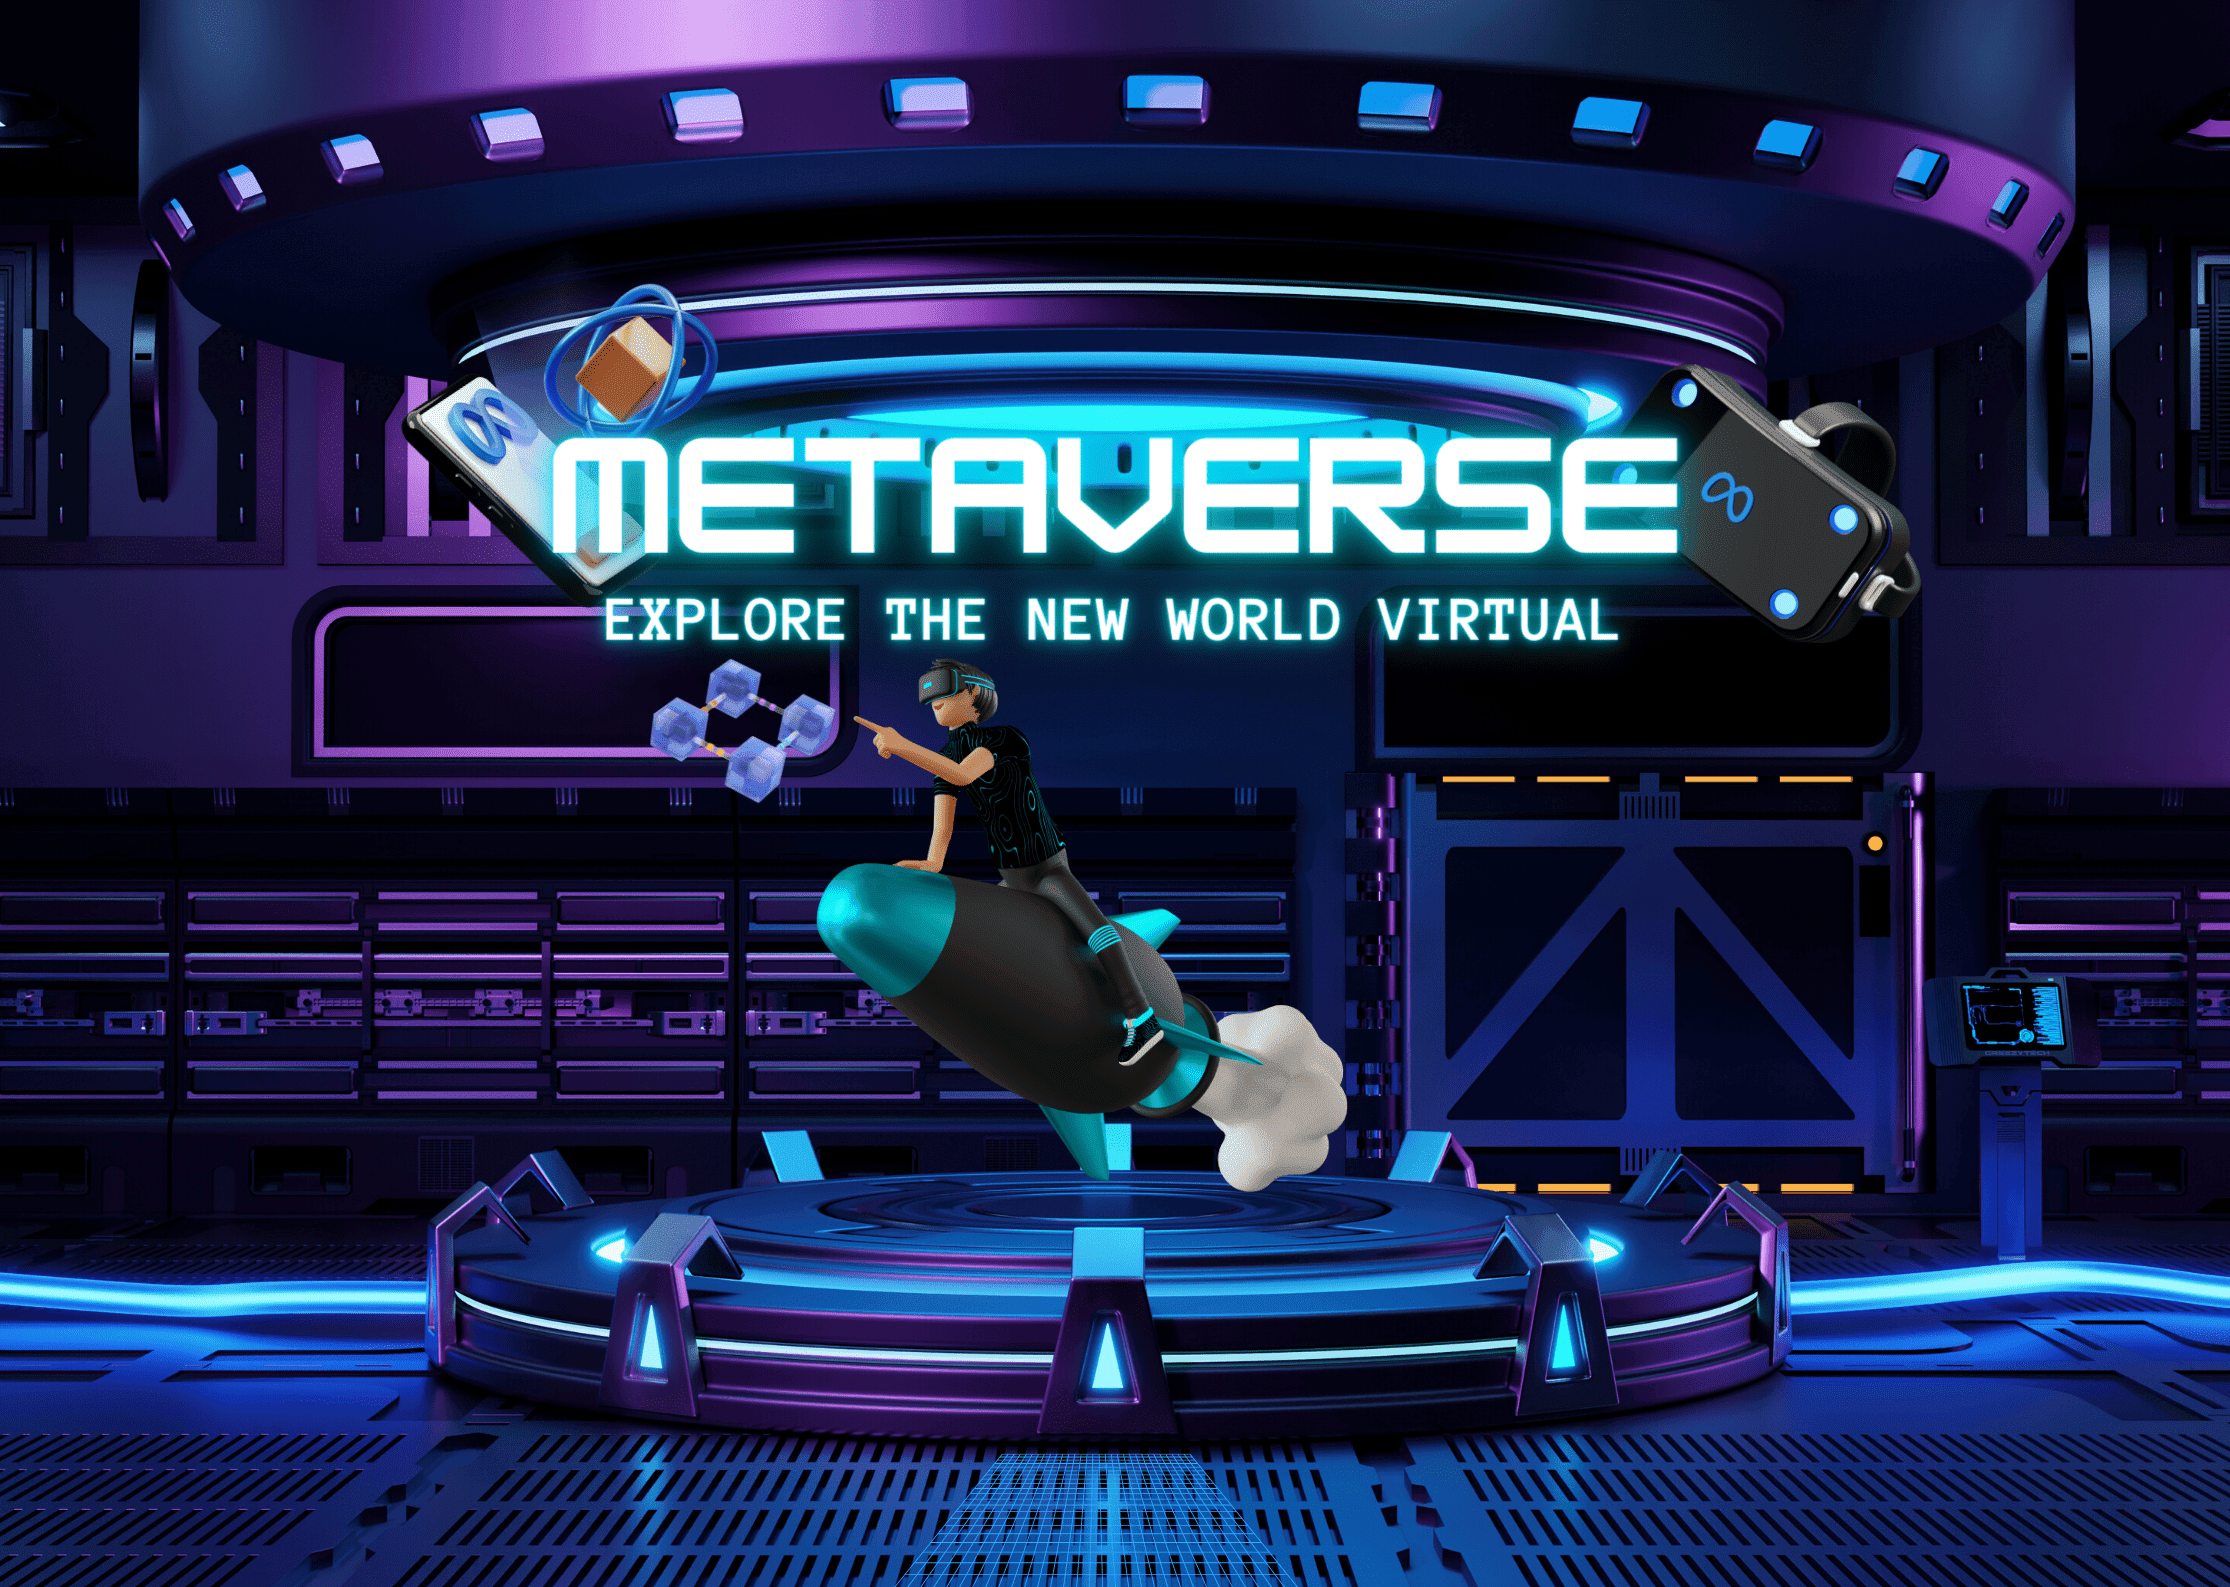 What Exactly Is the Metaverse, and Why Should You Care?